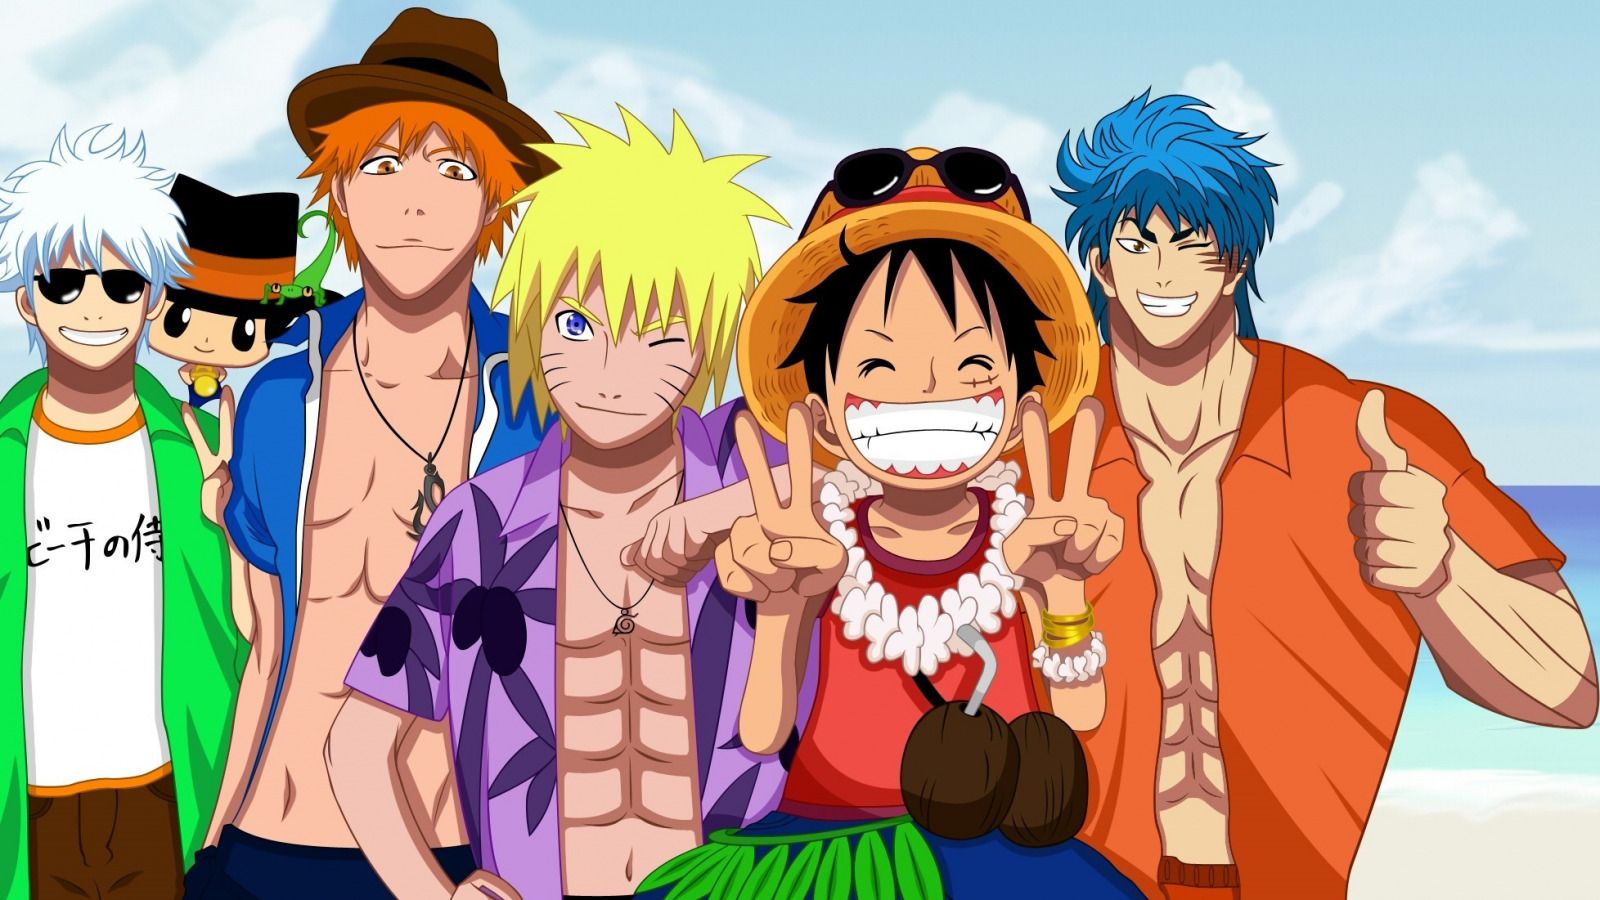 Download wallpaper game, Bleach, Naruto, One Piece, pirate, anime